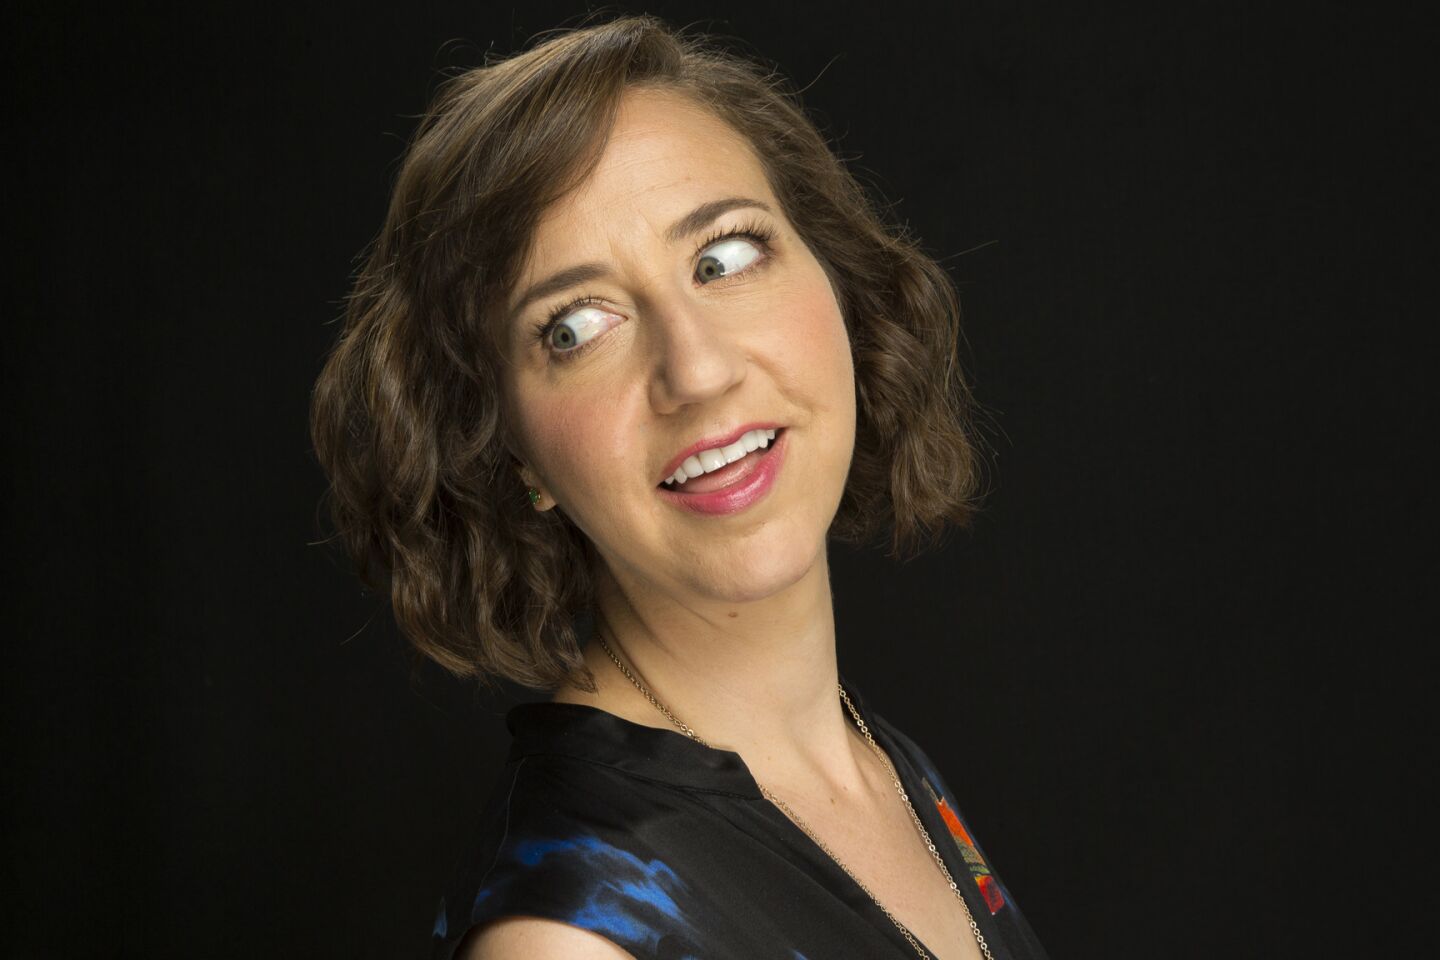 Celebrity portraits by The Times | Kristen Schaal